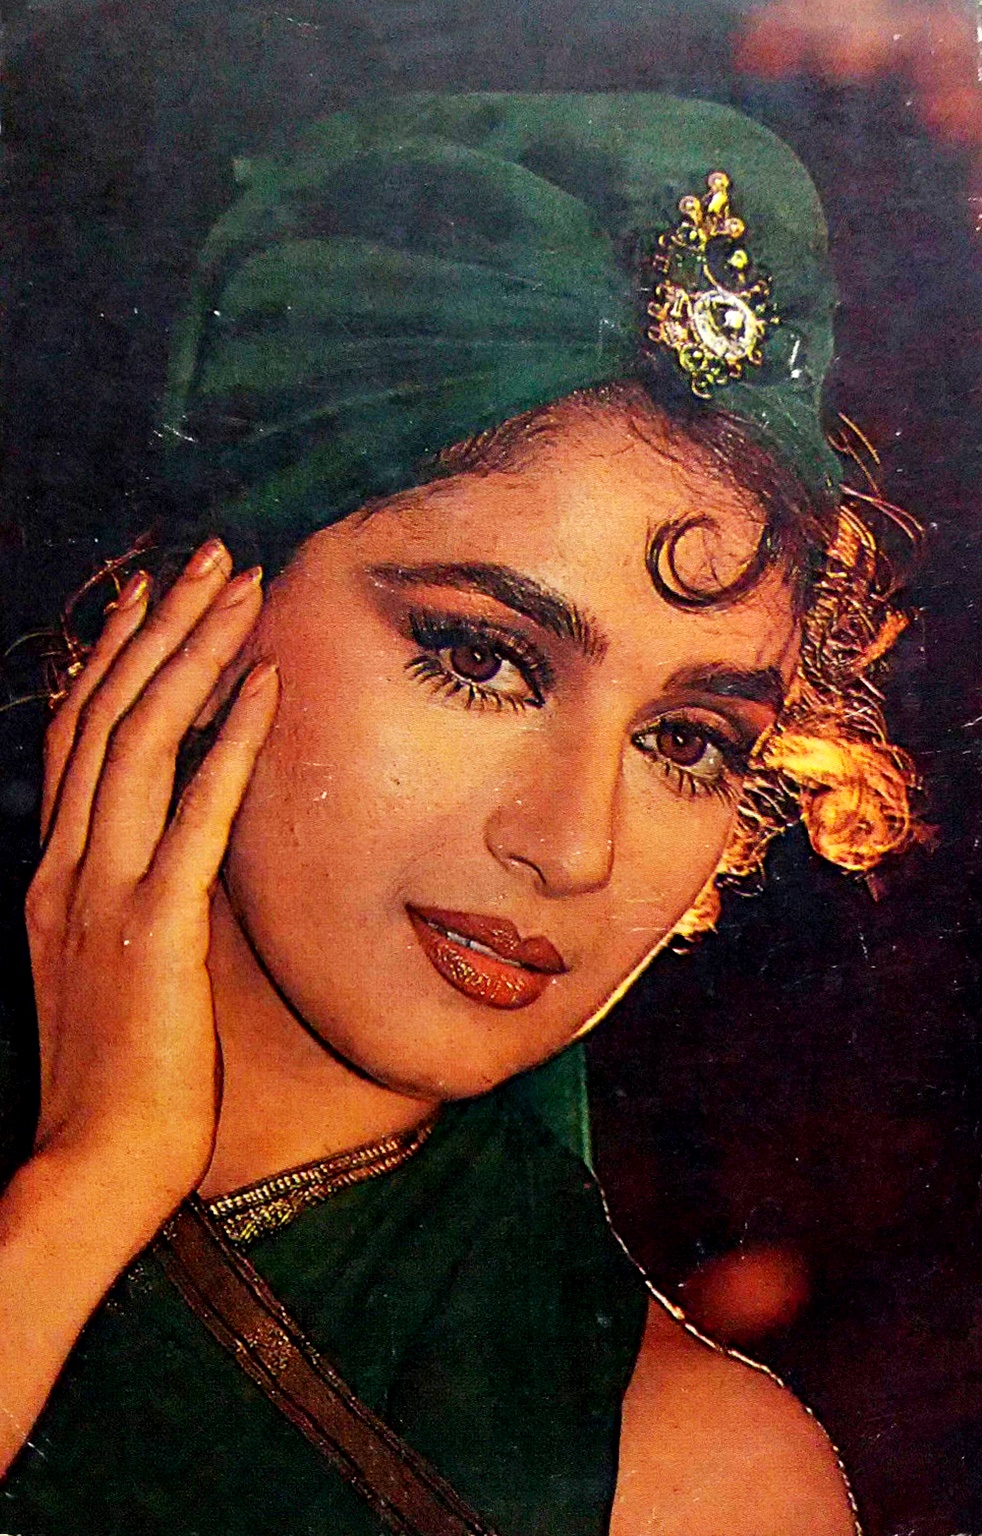 Madhuri dixit s naked sketches by artists